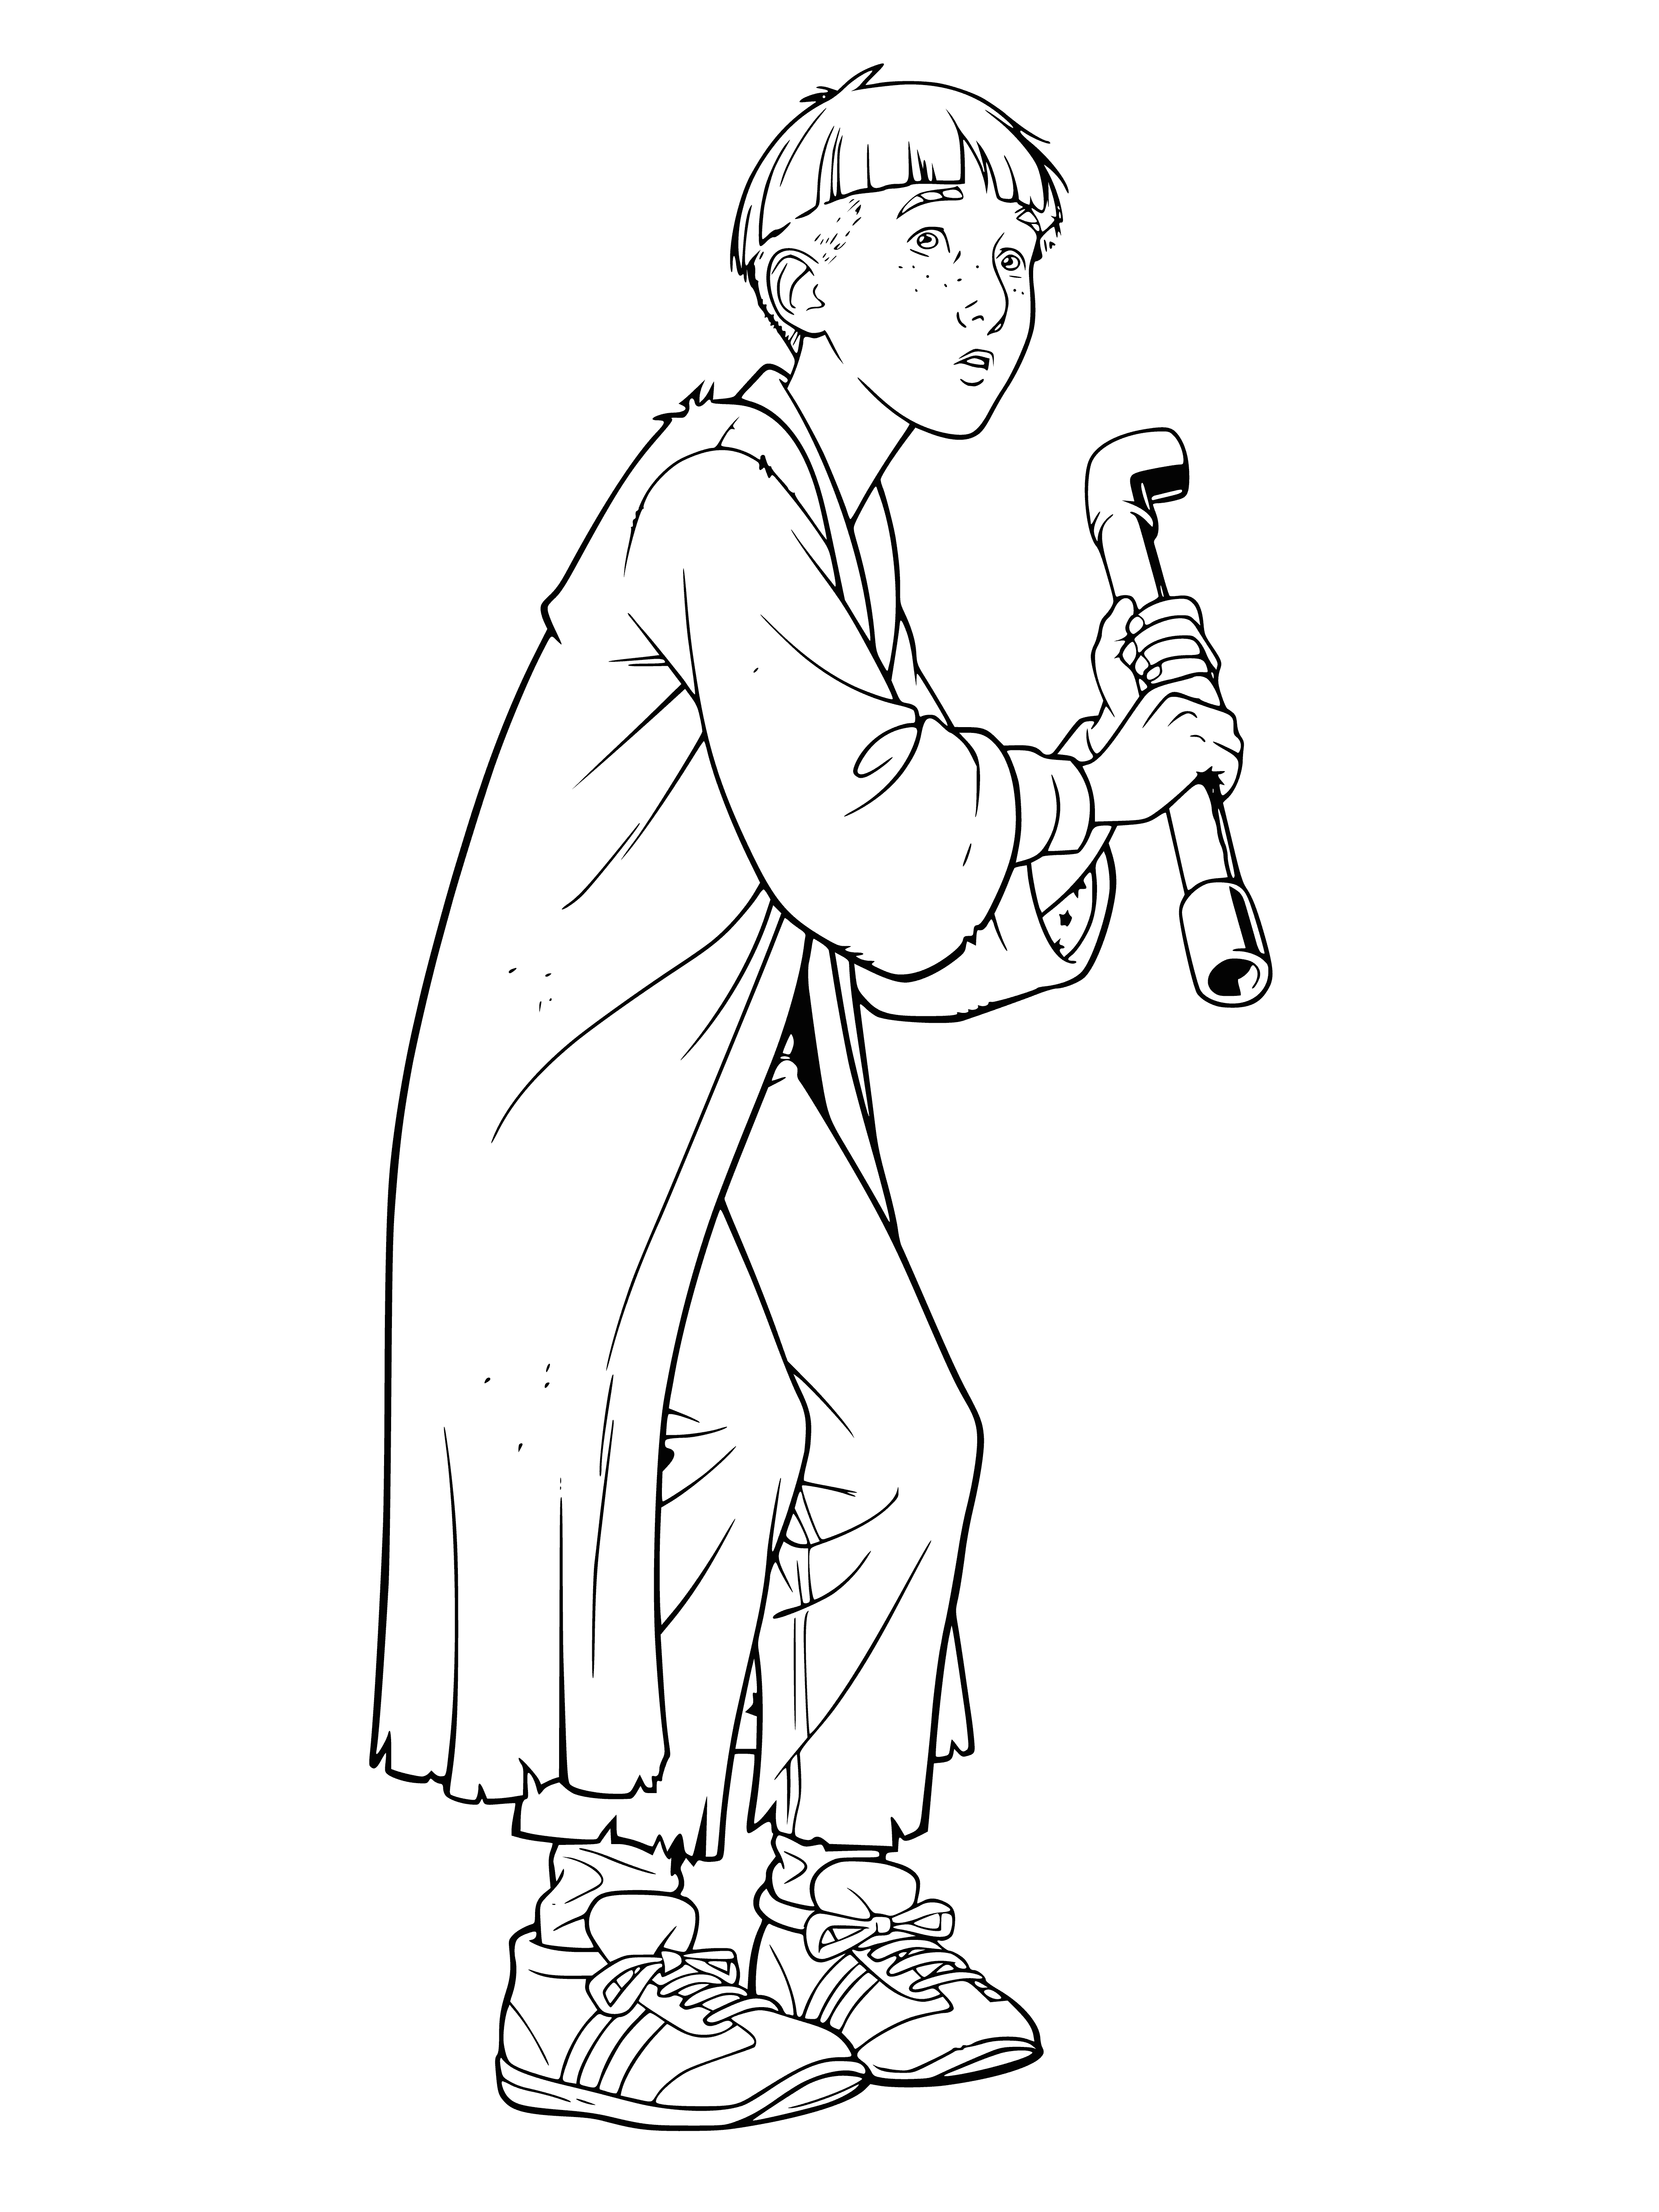 coloring page: Ron, ginger-haired, in blue jacket, holds wand in front of brick wall.